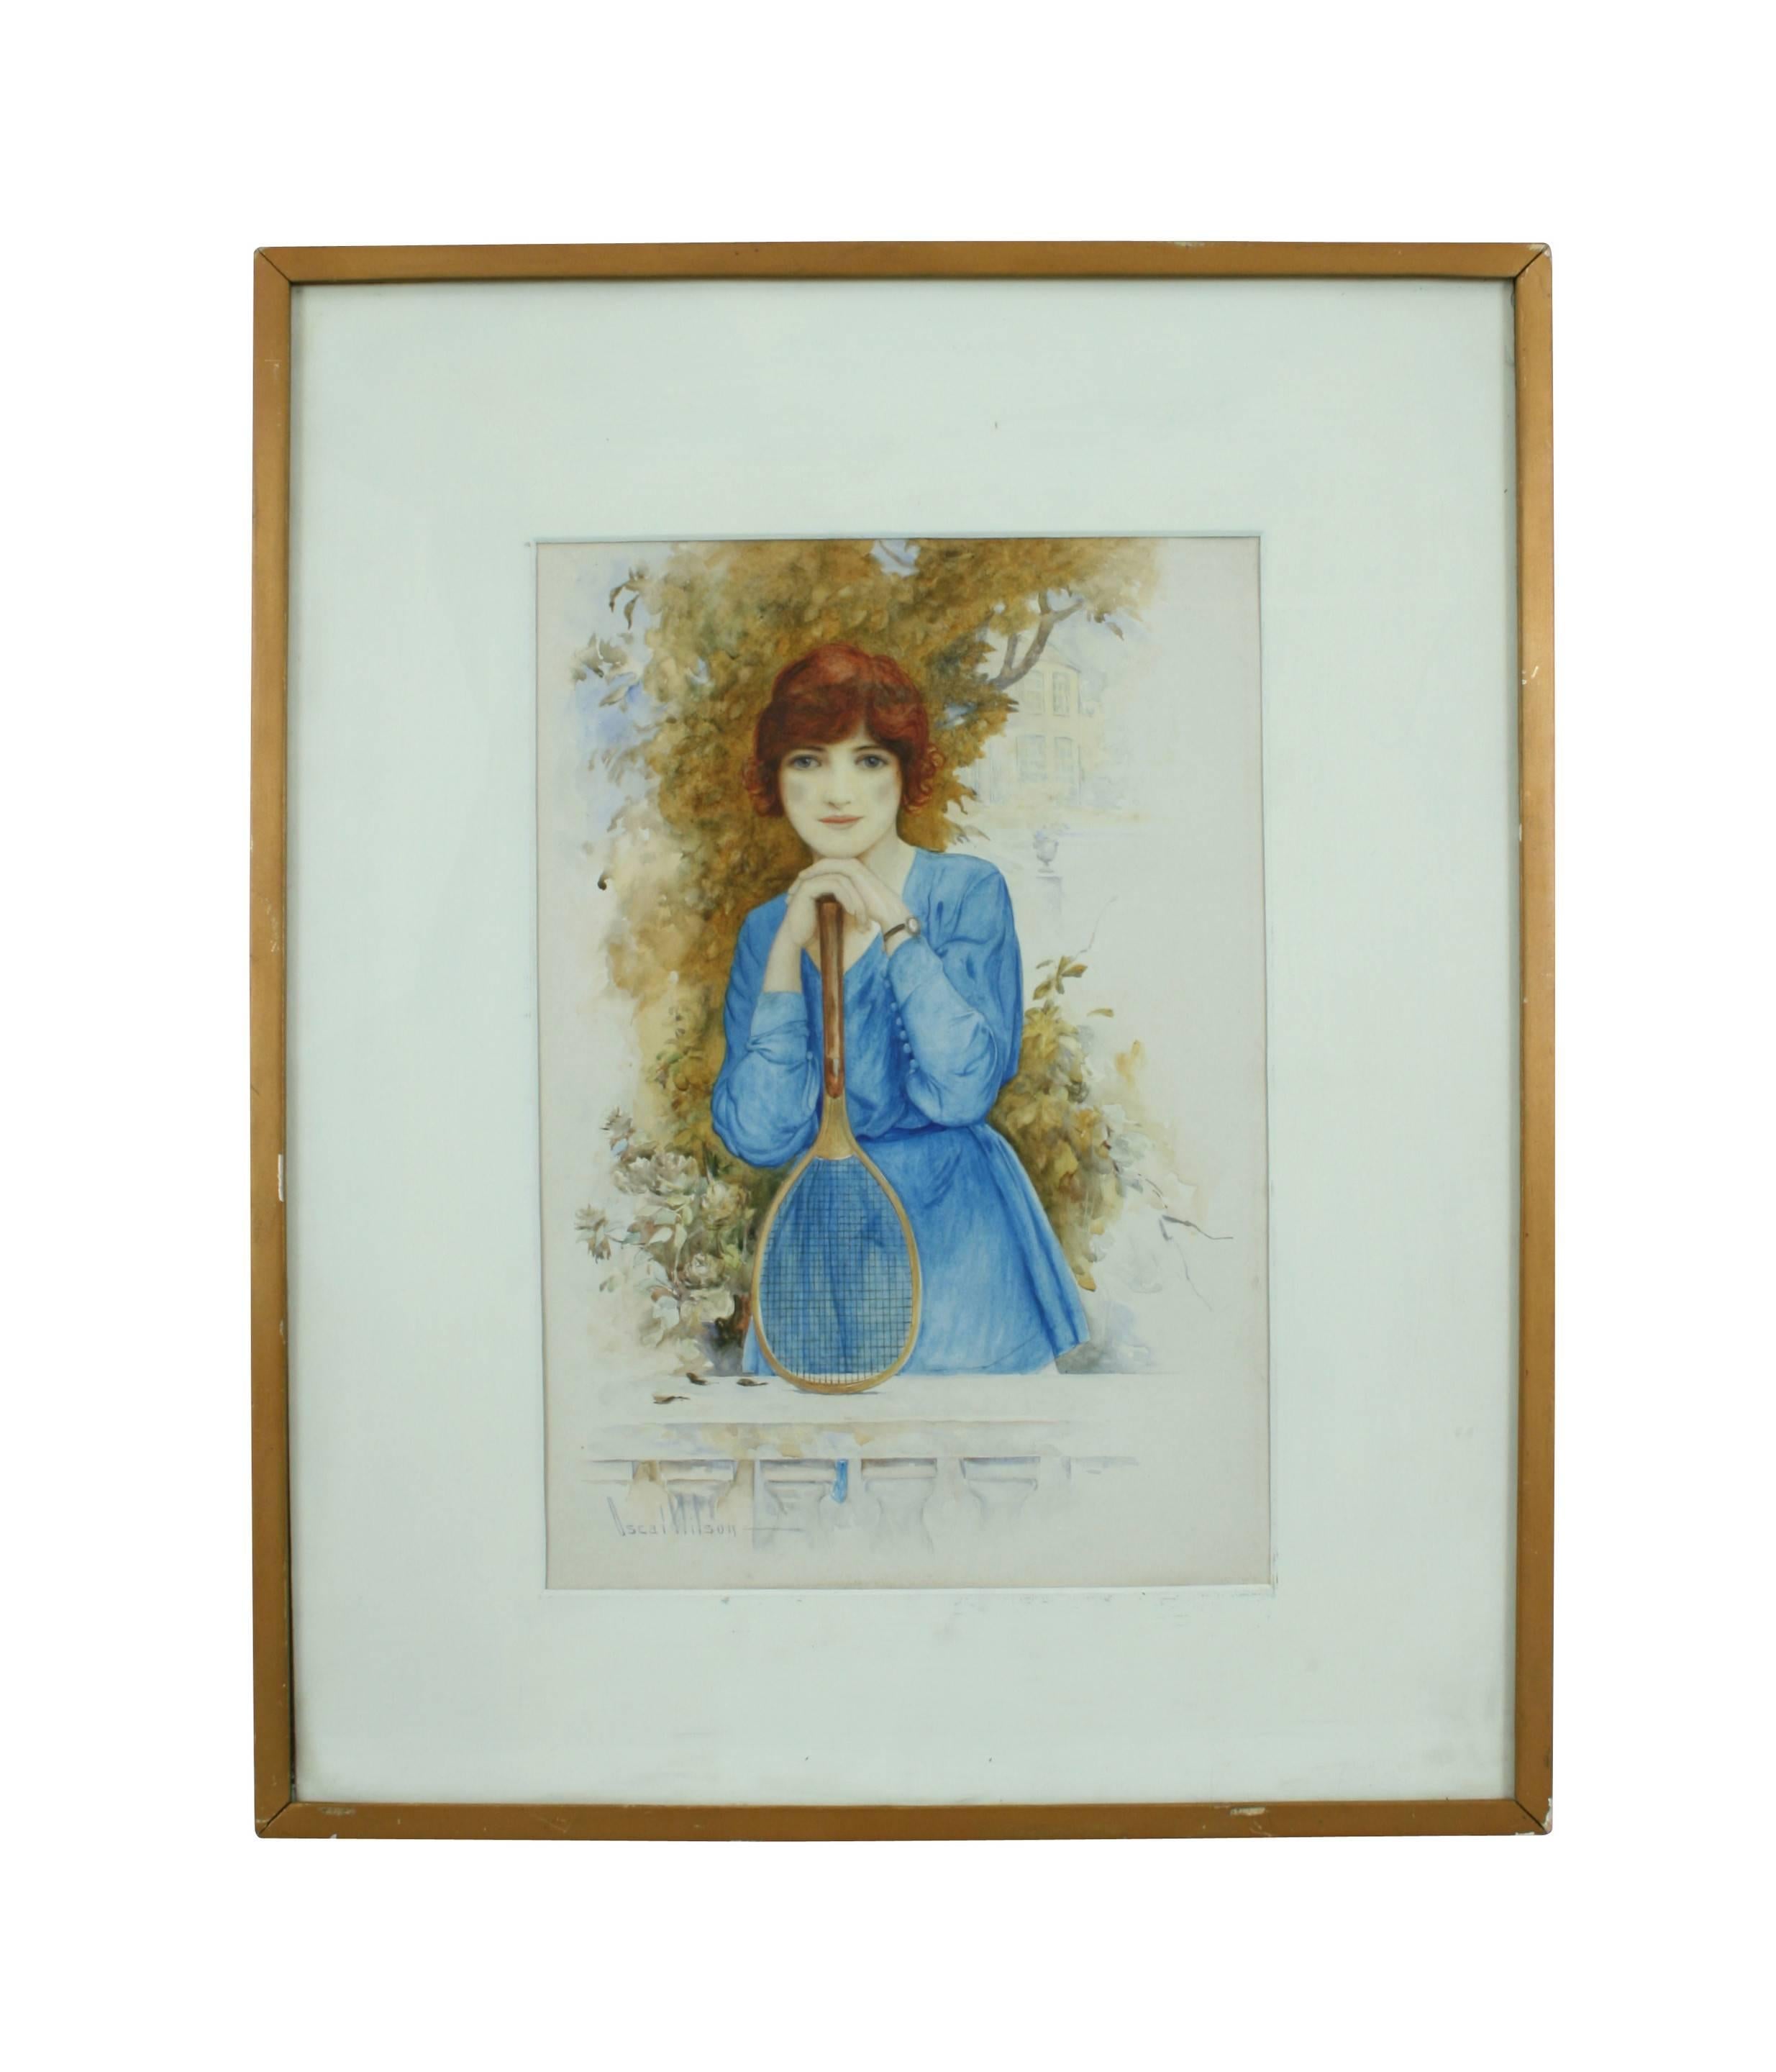 The tennis girl, painting in watercolor.
A fine, well-executed watercolor painting by Oscar Wilson (1867-1930),